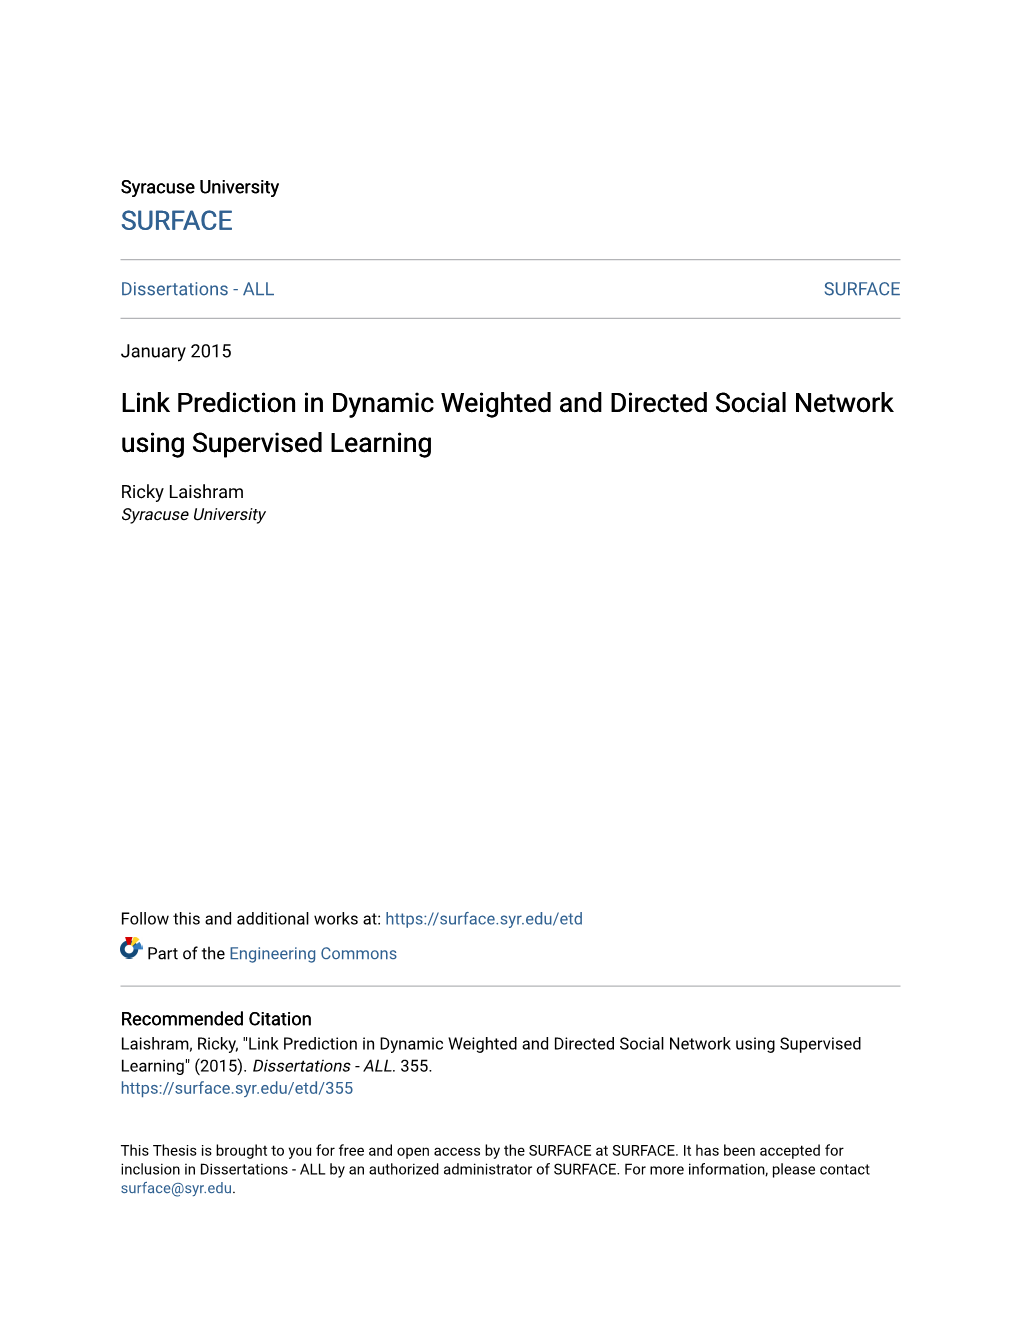 Link Prediction in Dynamic Weighted and Directed Social Network Using Supervised Learning